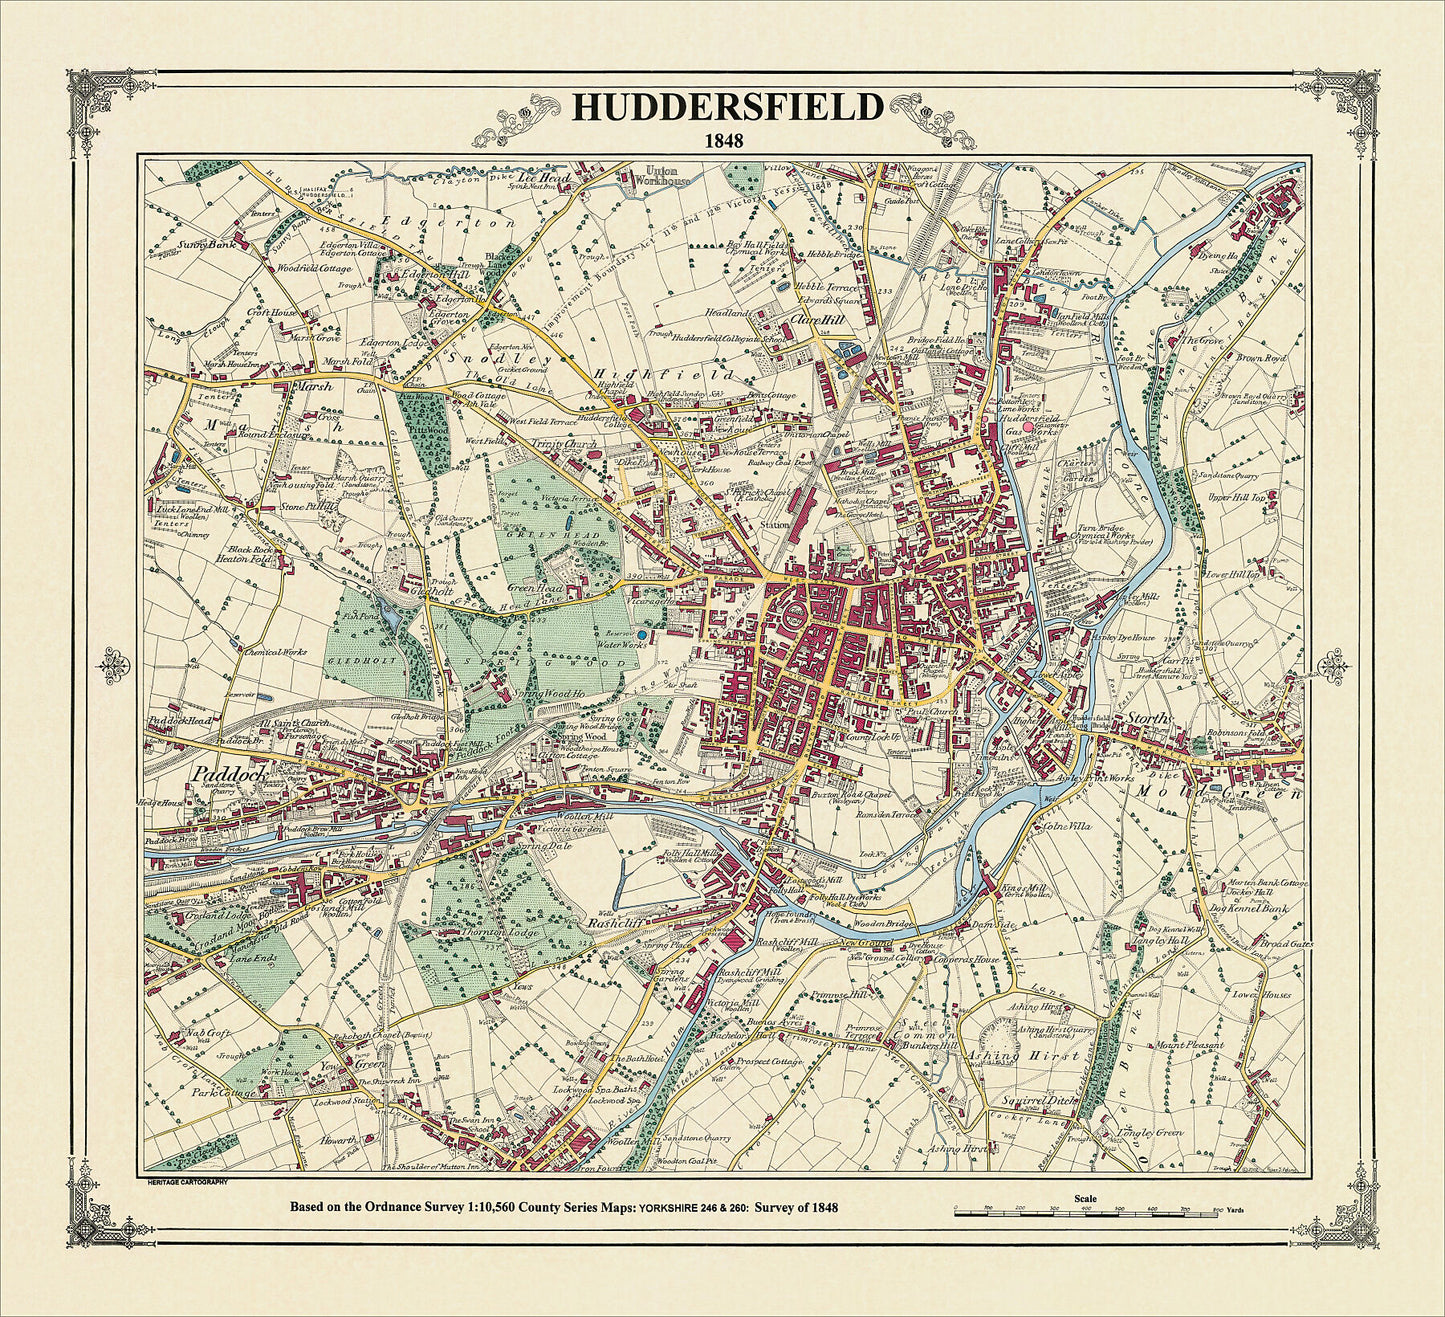 Coloured Victorian map of Huddersfield in 1848 by Peter J Adams of Heritage Cartography